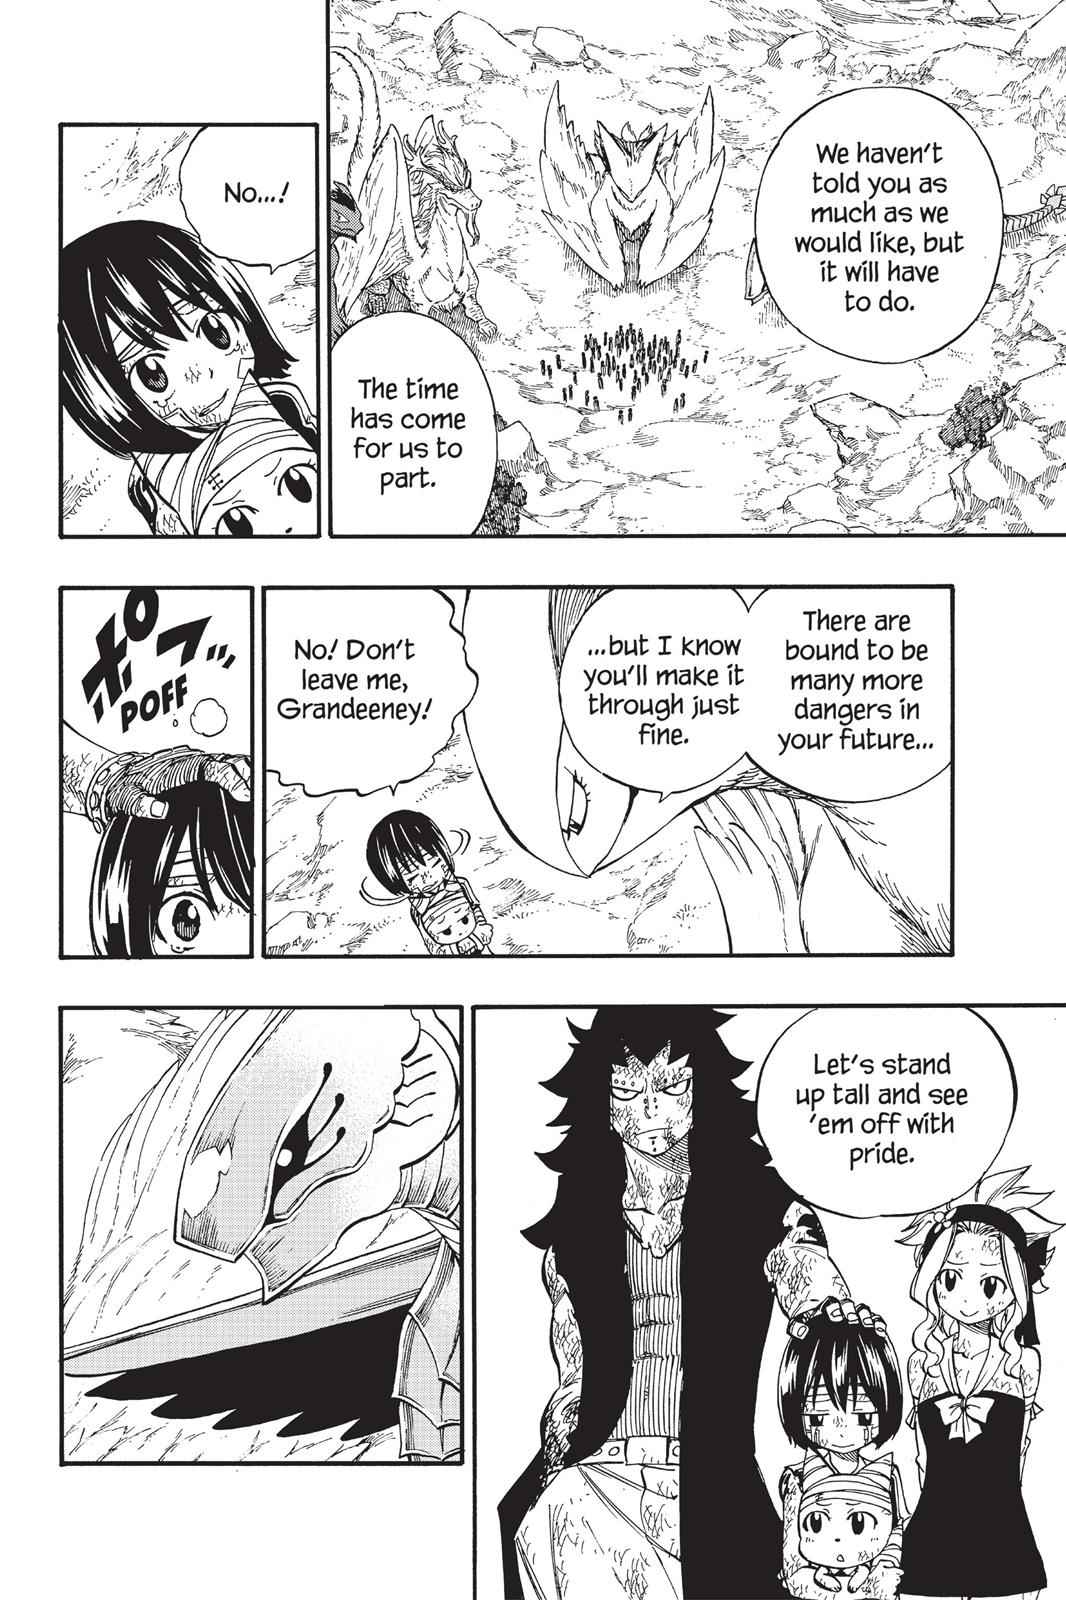  Chapter 415 image 012